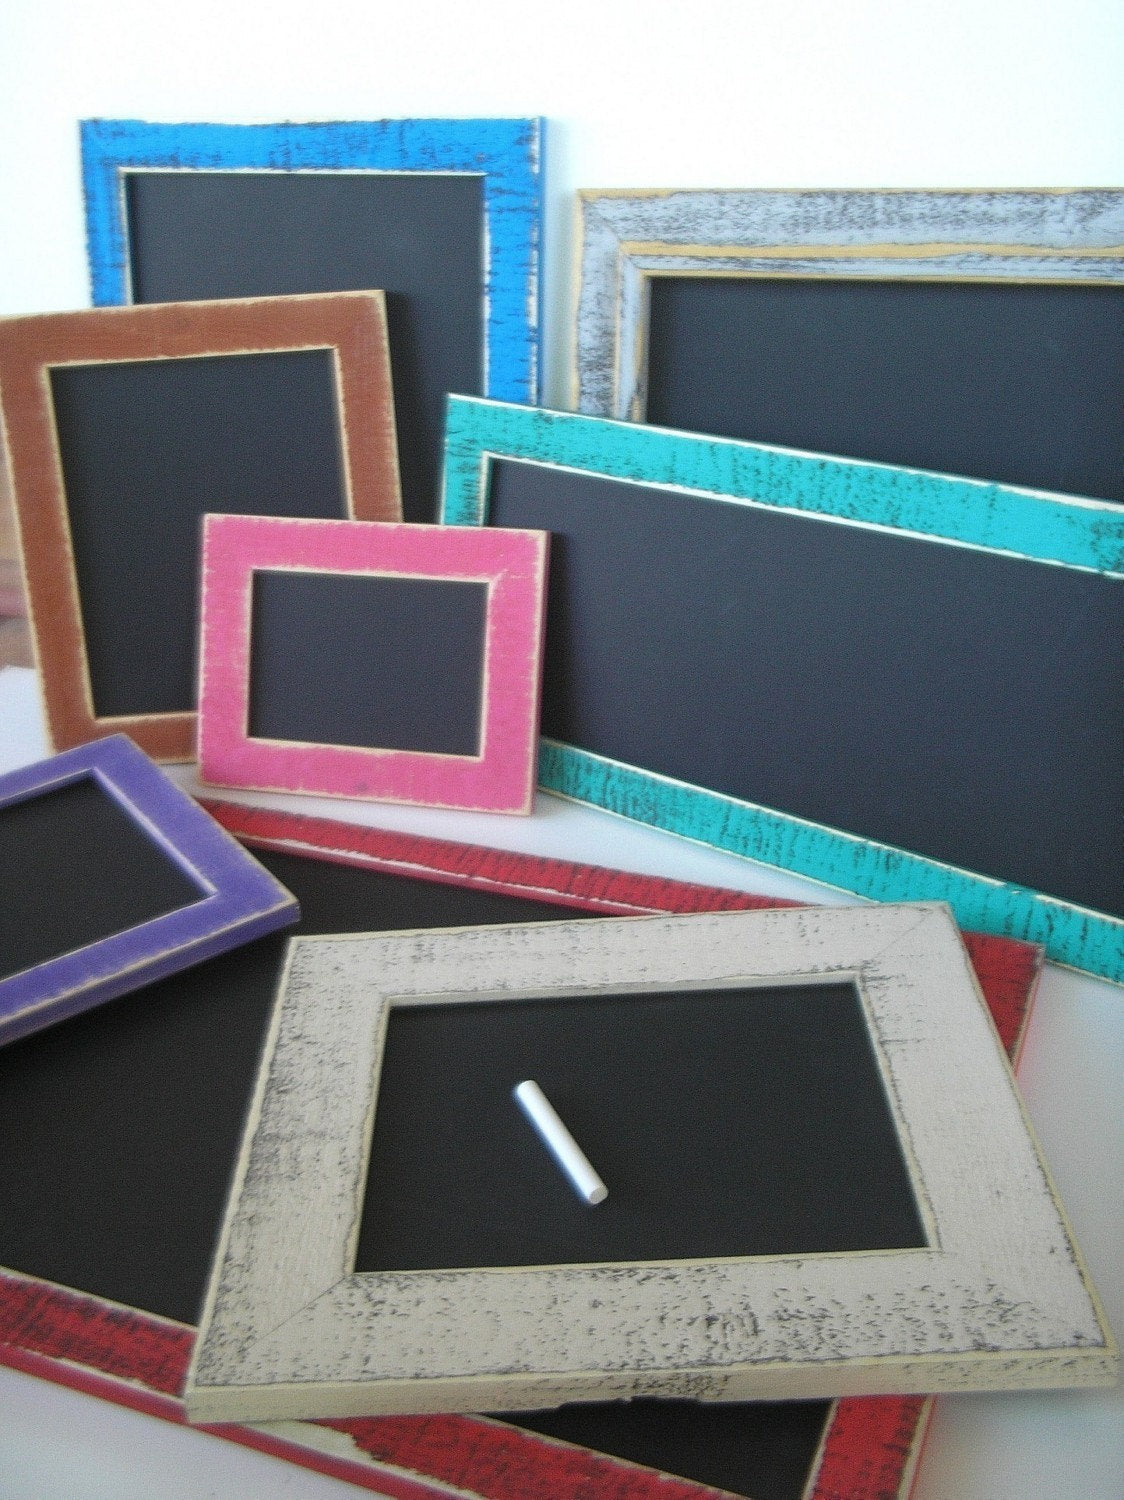 Chalkboard Picture frame package 16x20 or 16x16 Chalkboard framed choose color and style picture frame (Custom sizes, styles available)